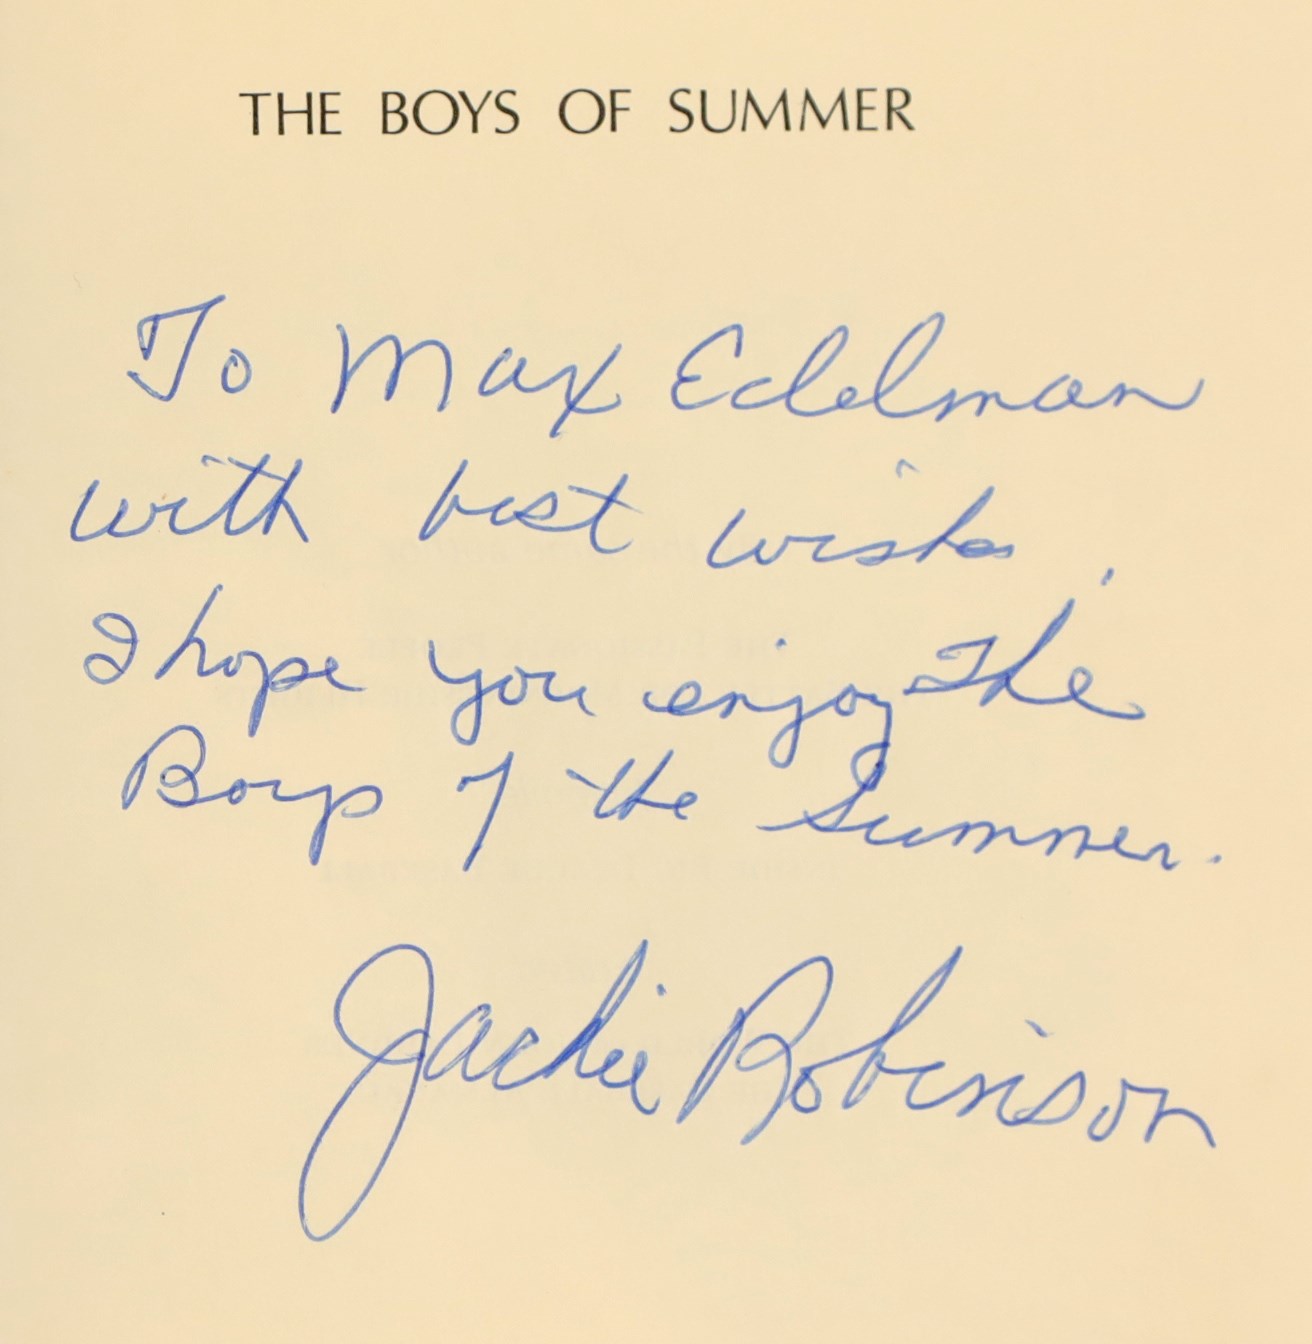 Jackie Robinson " Boys of The Summer" Signed Book (PSA)